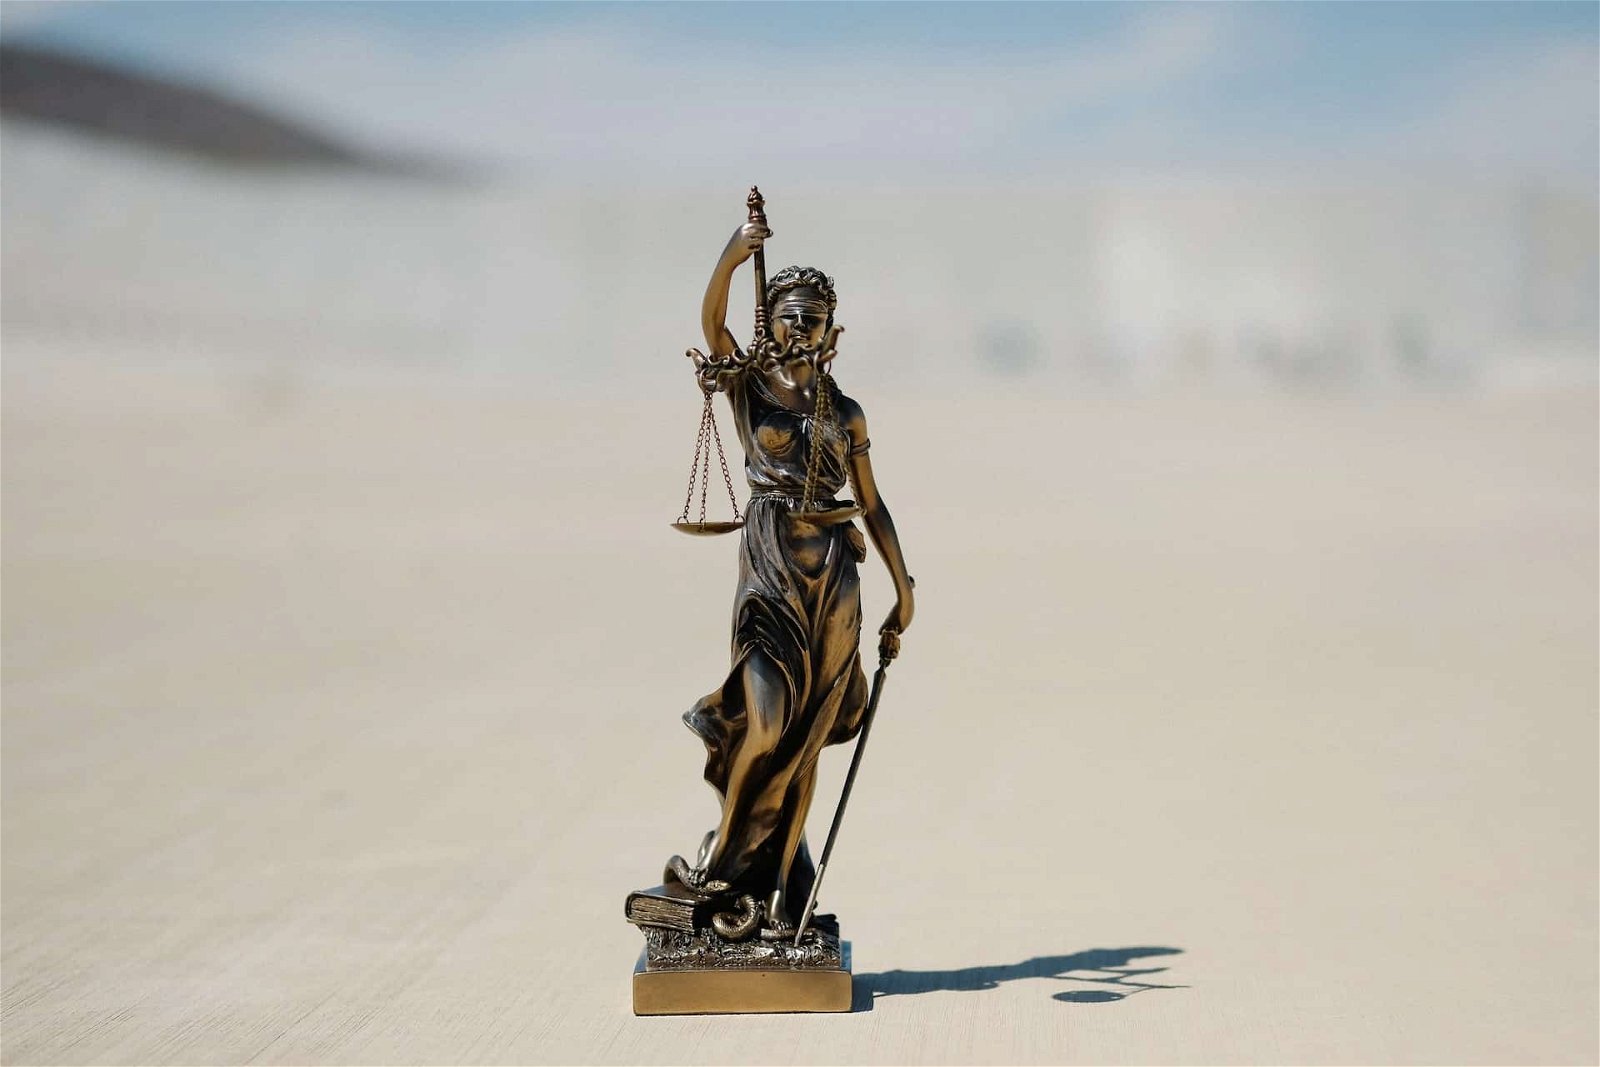 A Lady of Justice statuette